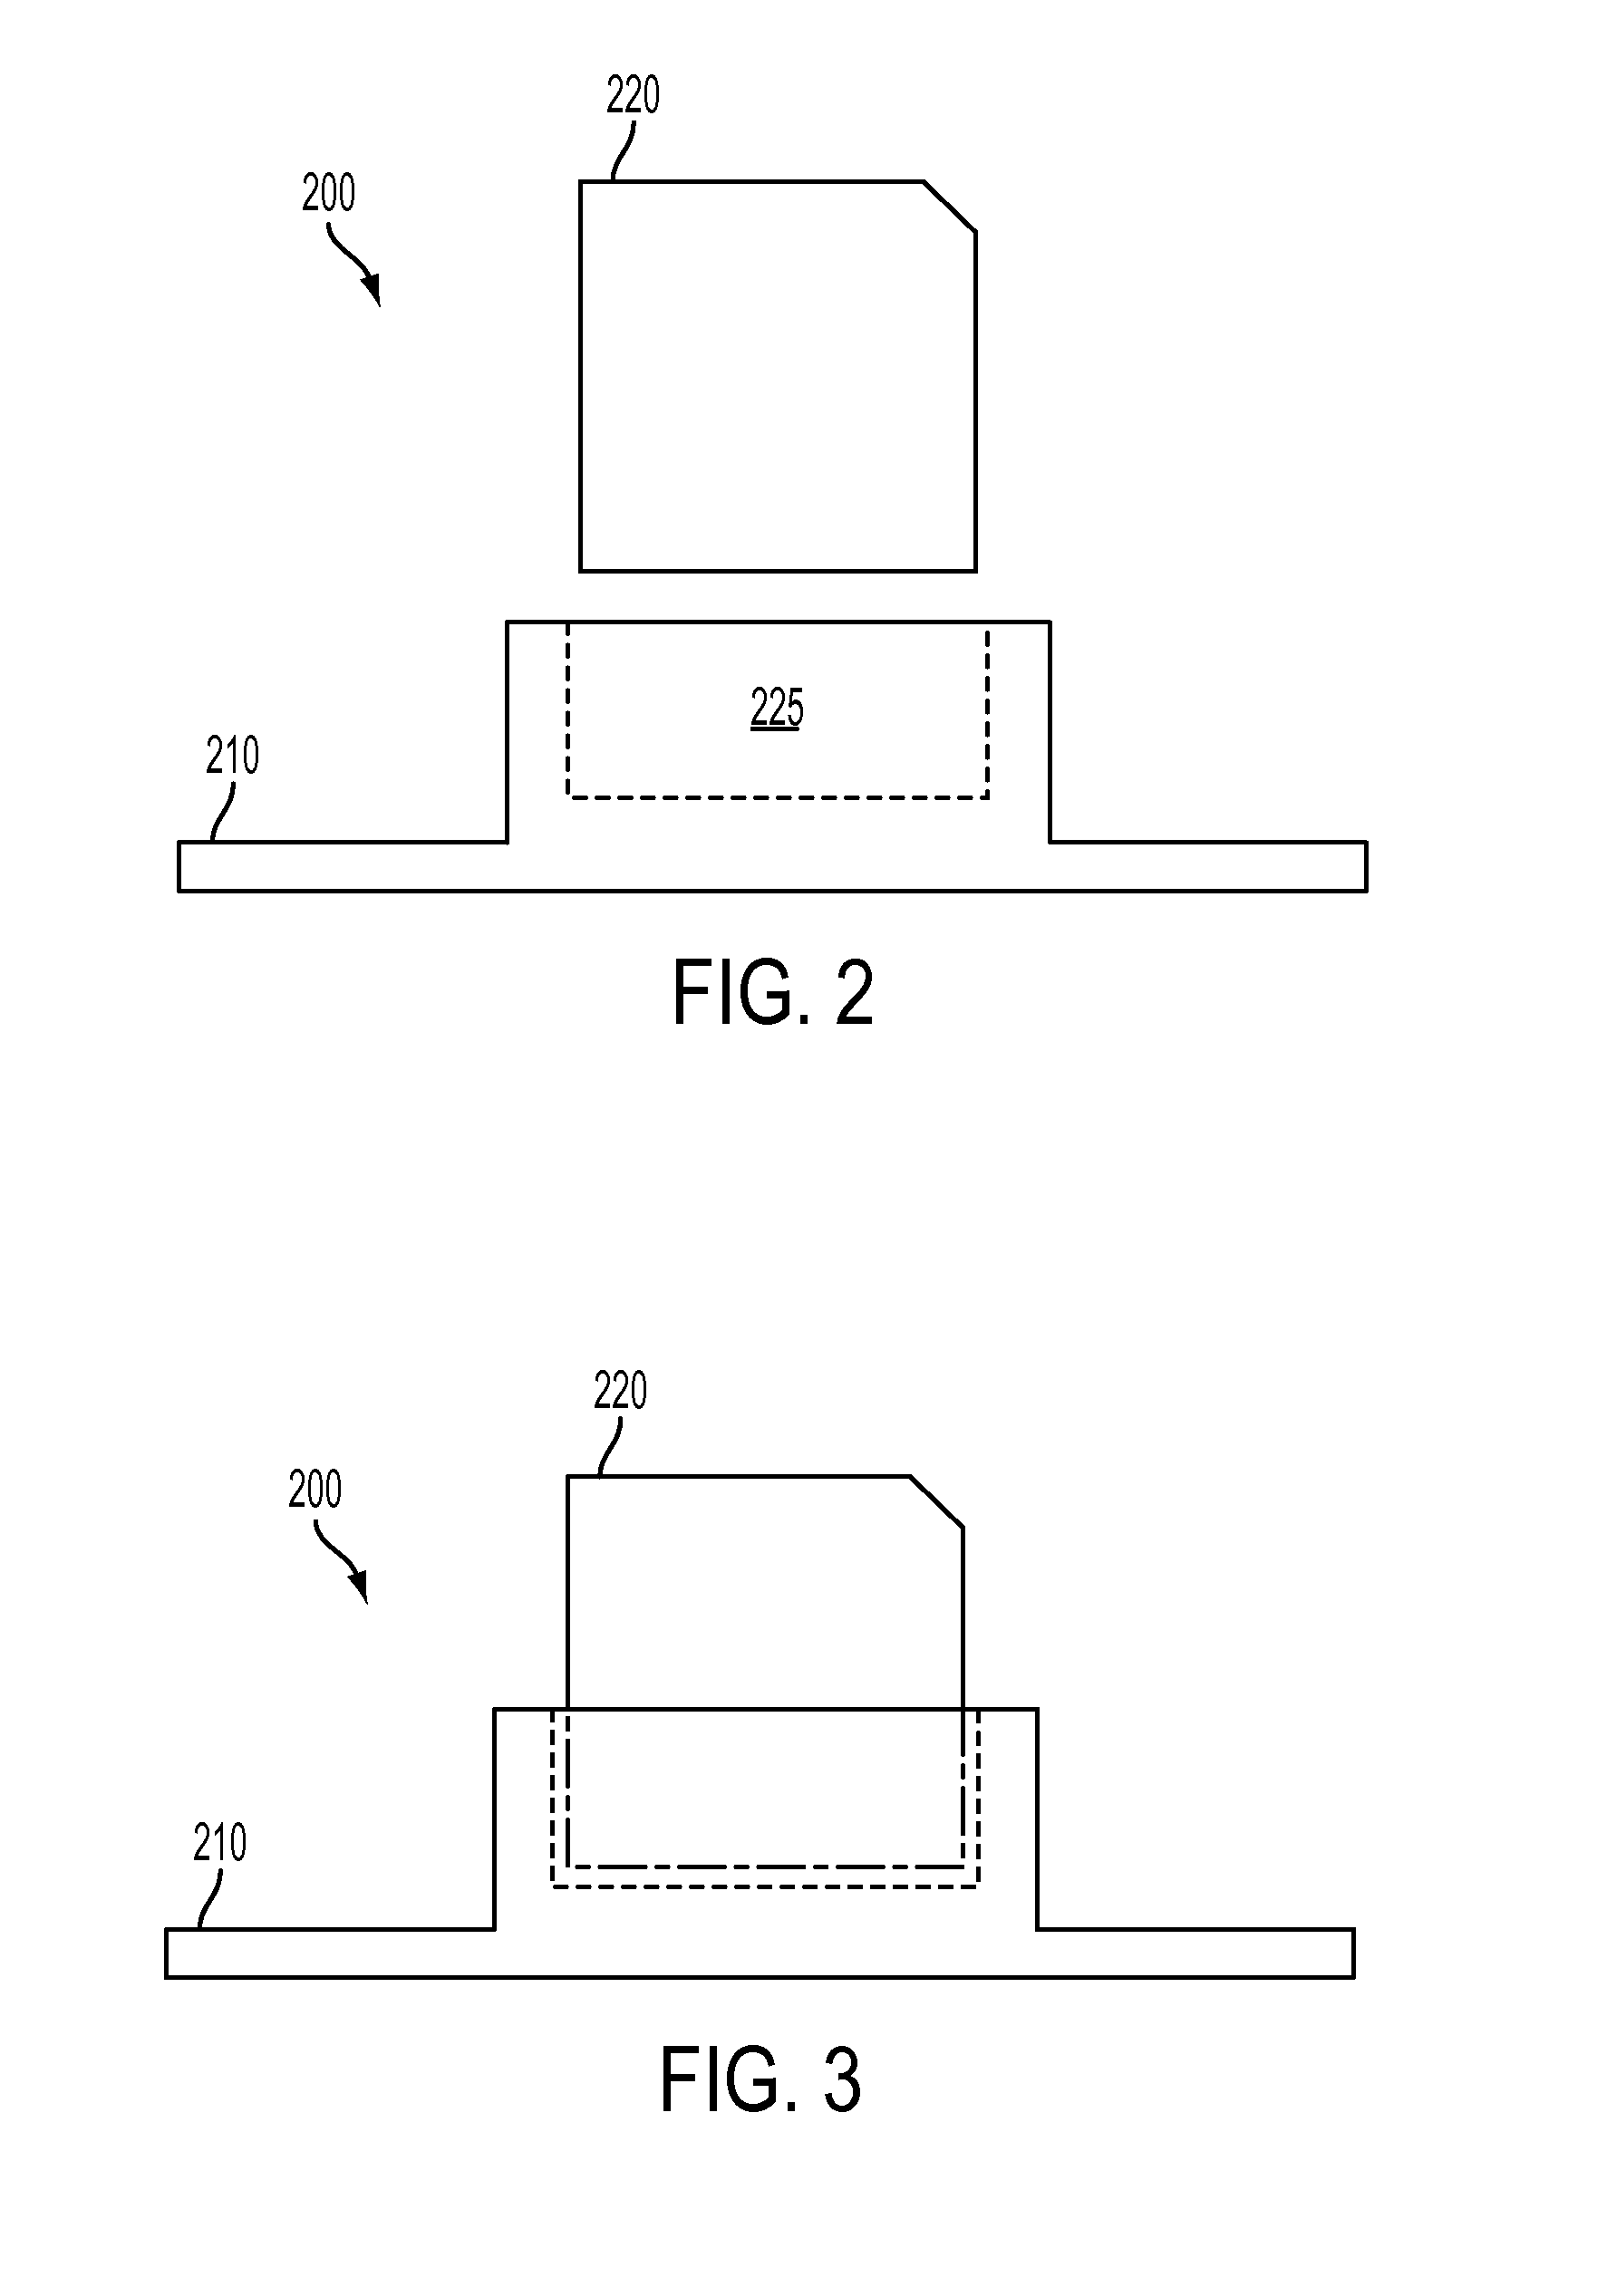 Systems and methods for providing combined configuration management and product identification